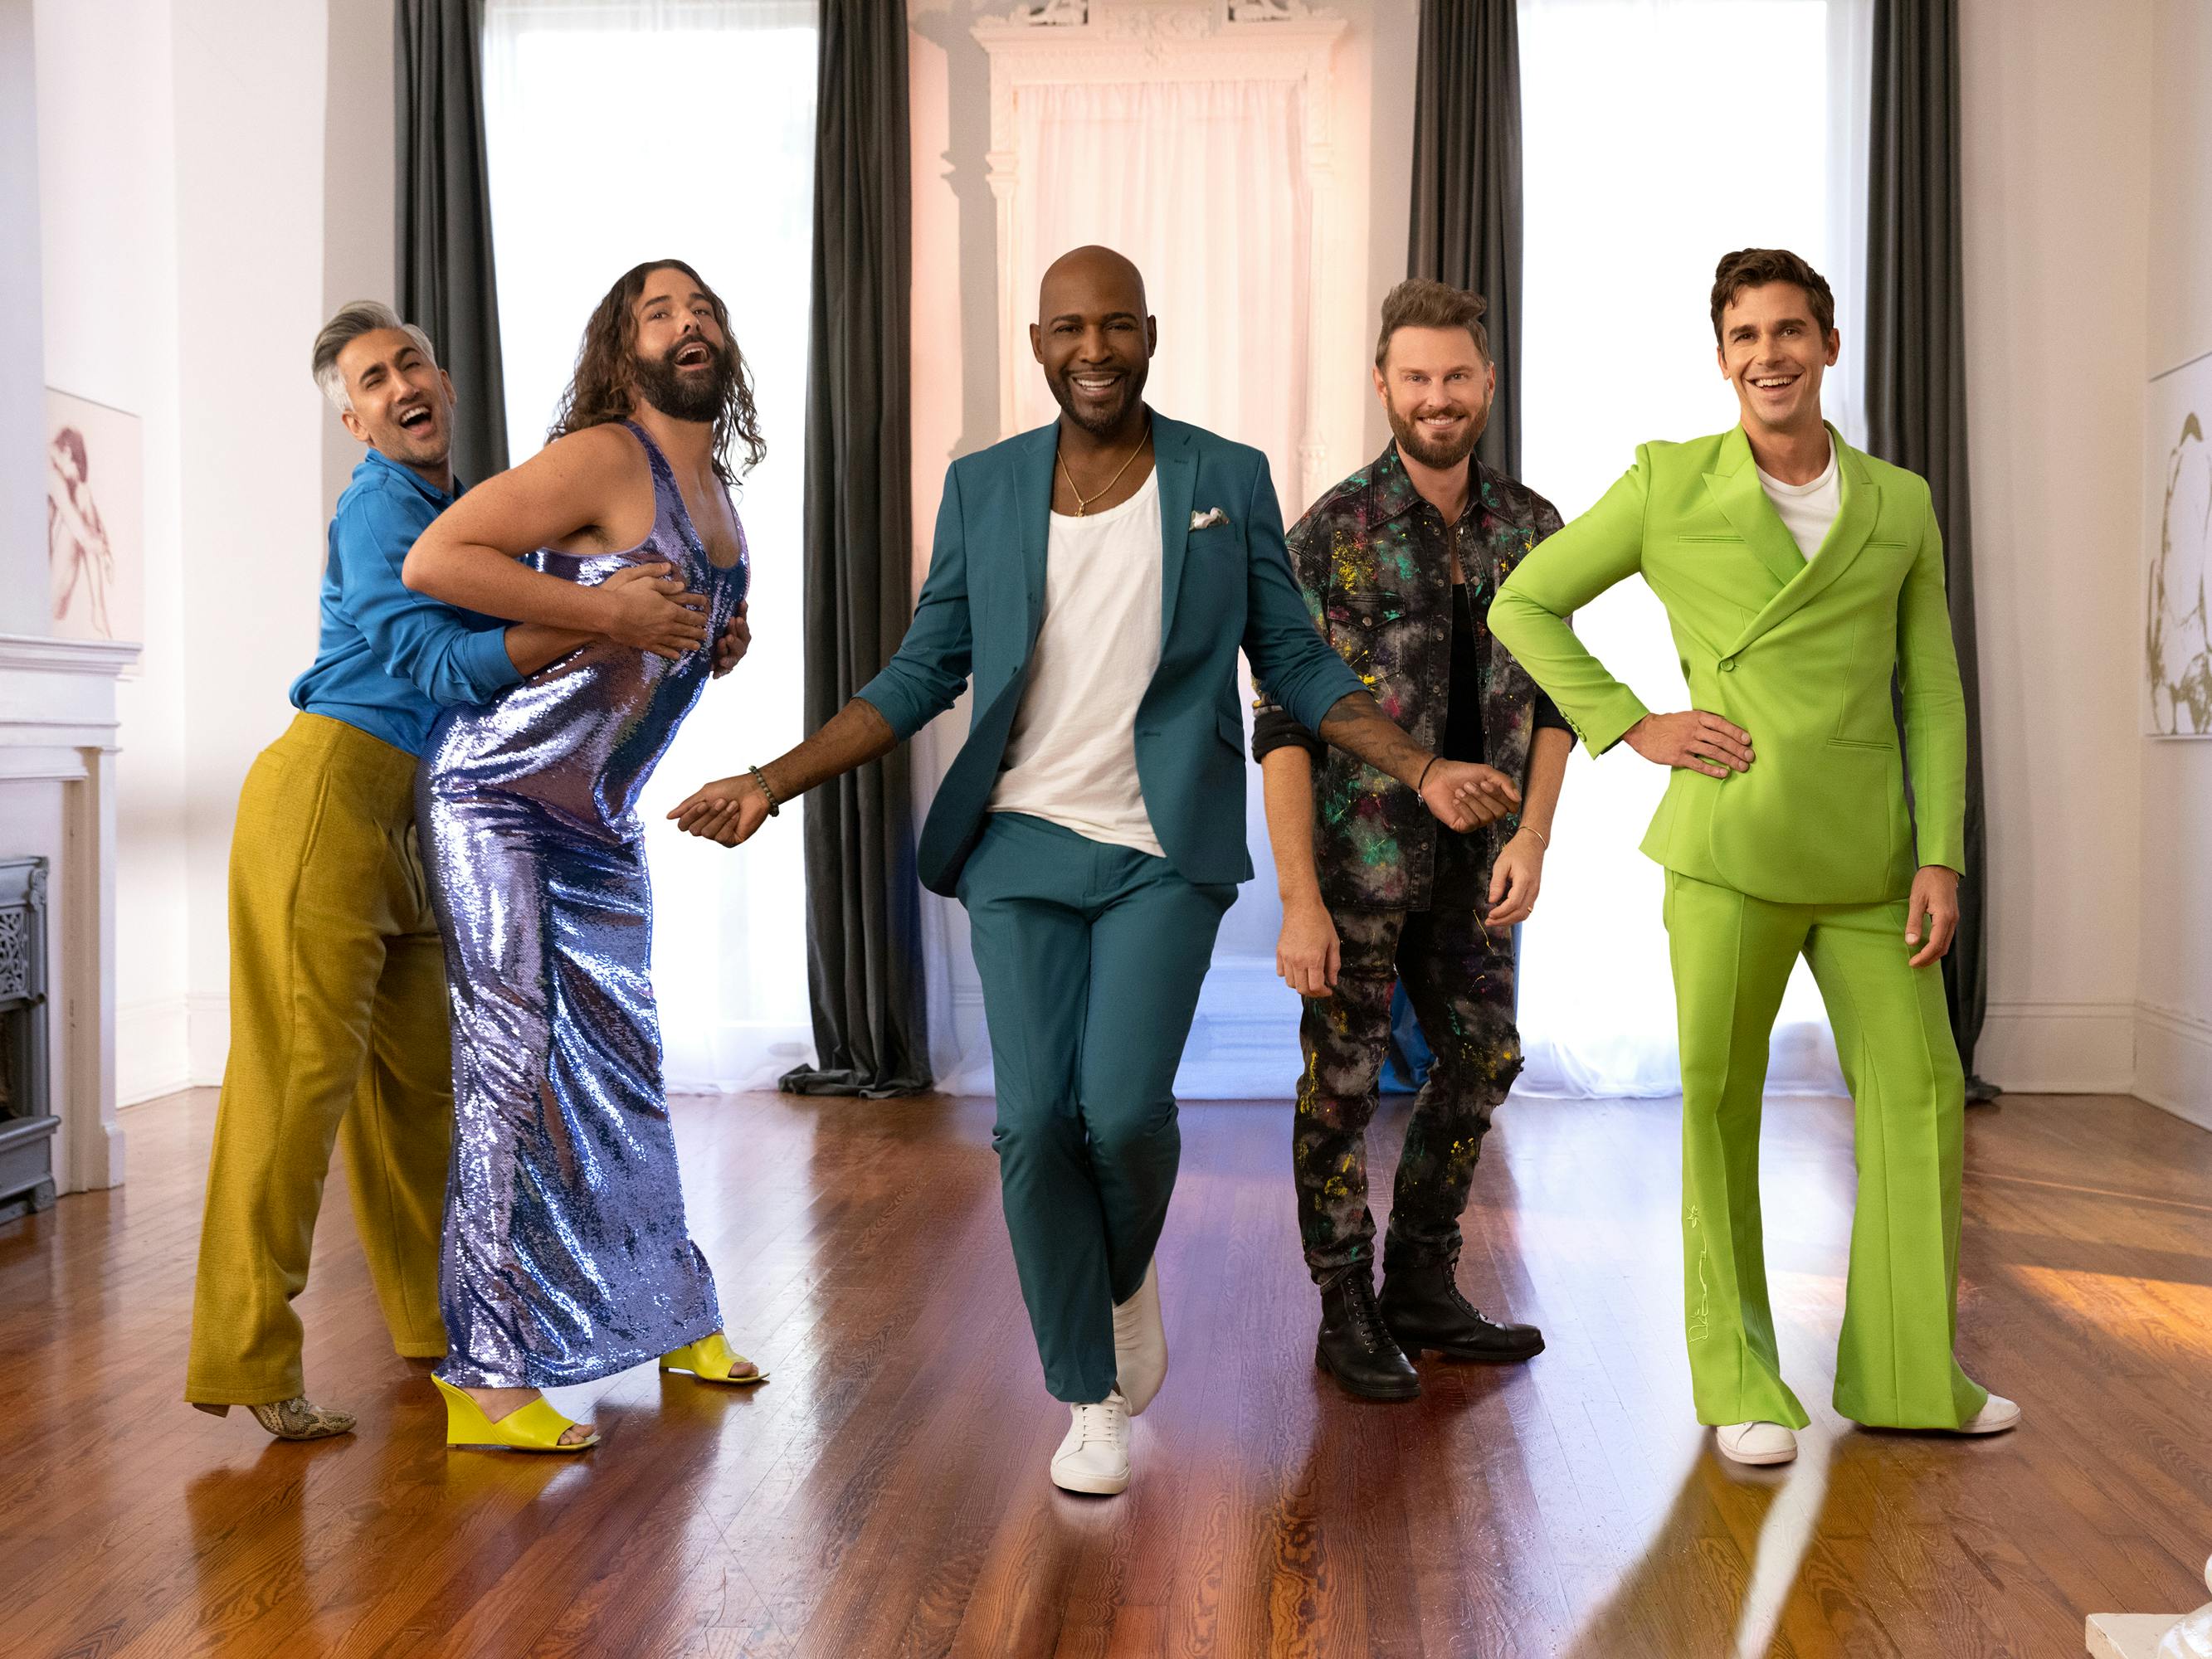 The Fab Five — Tan France, Jonathan Van Ness, Karamo, Bobby Berk, and Antoni Porowski. Each wears a bright outfit: Tan pairs a bright blue shirt with yellow pants, Van Ness glitters in a jumpsuit and yellow shoes, Karamo strikes a pose in a teal suit, Berk wears a matching set in a chaotic pattern, and Porowski wears an extremely tailored lime green double-breasted suit.